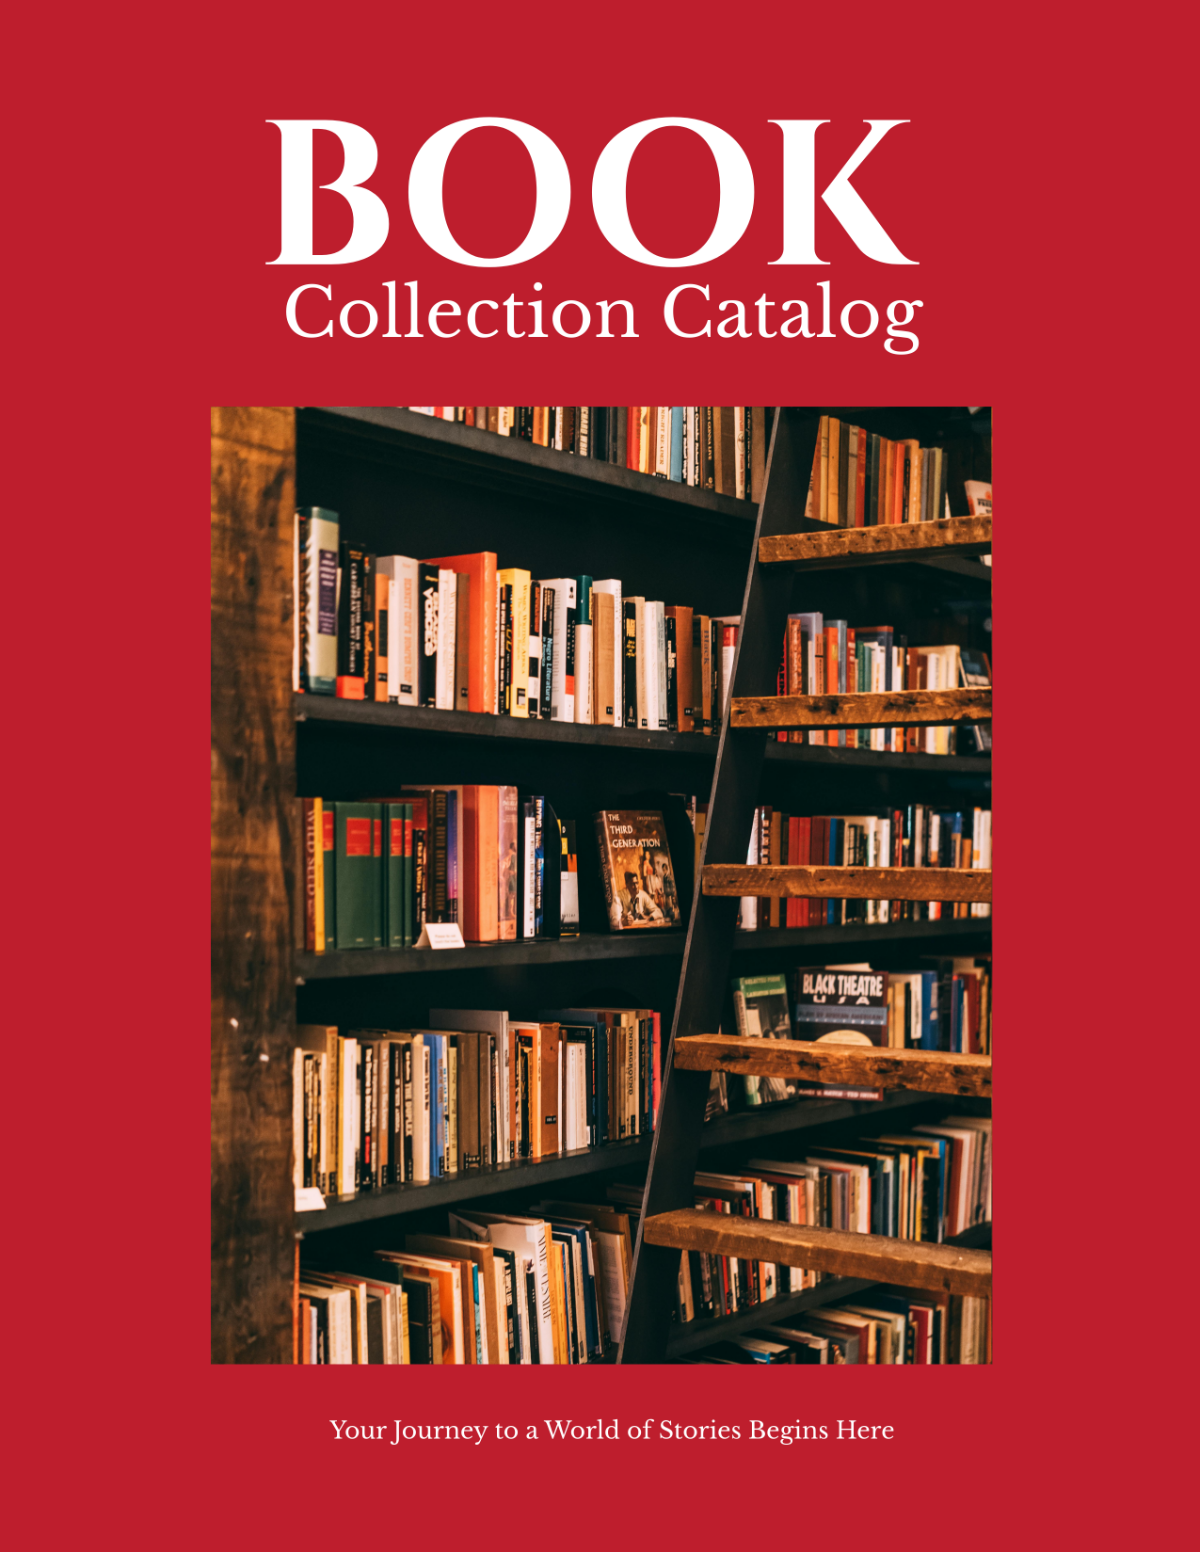 Online Book Collection Catalog